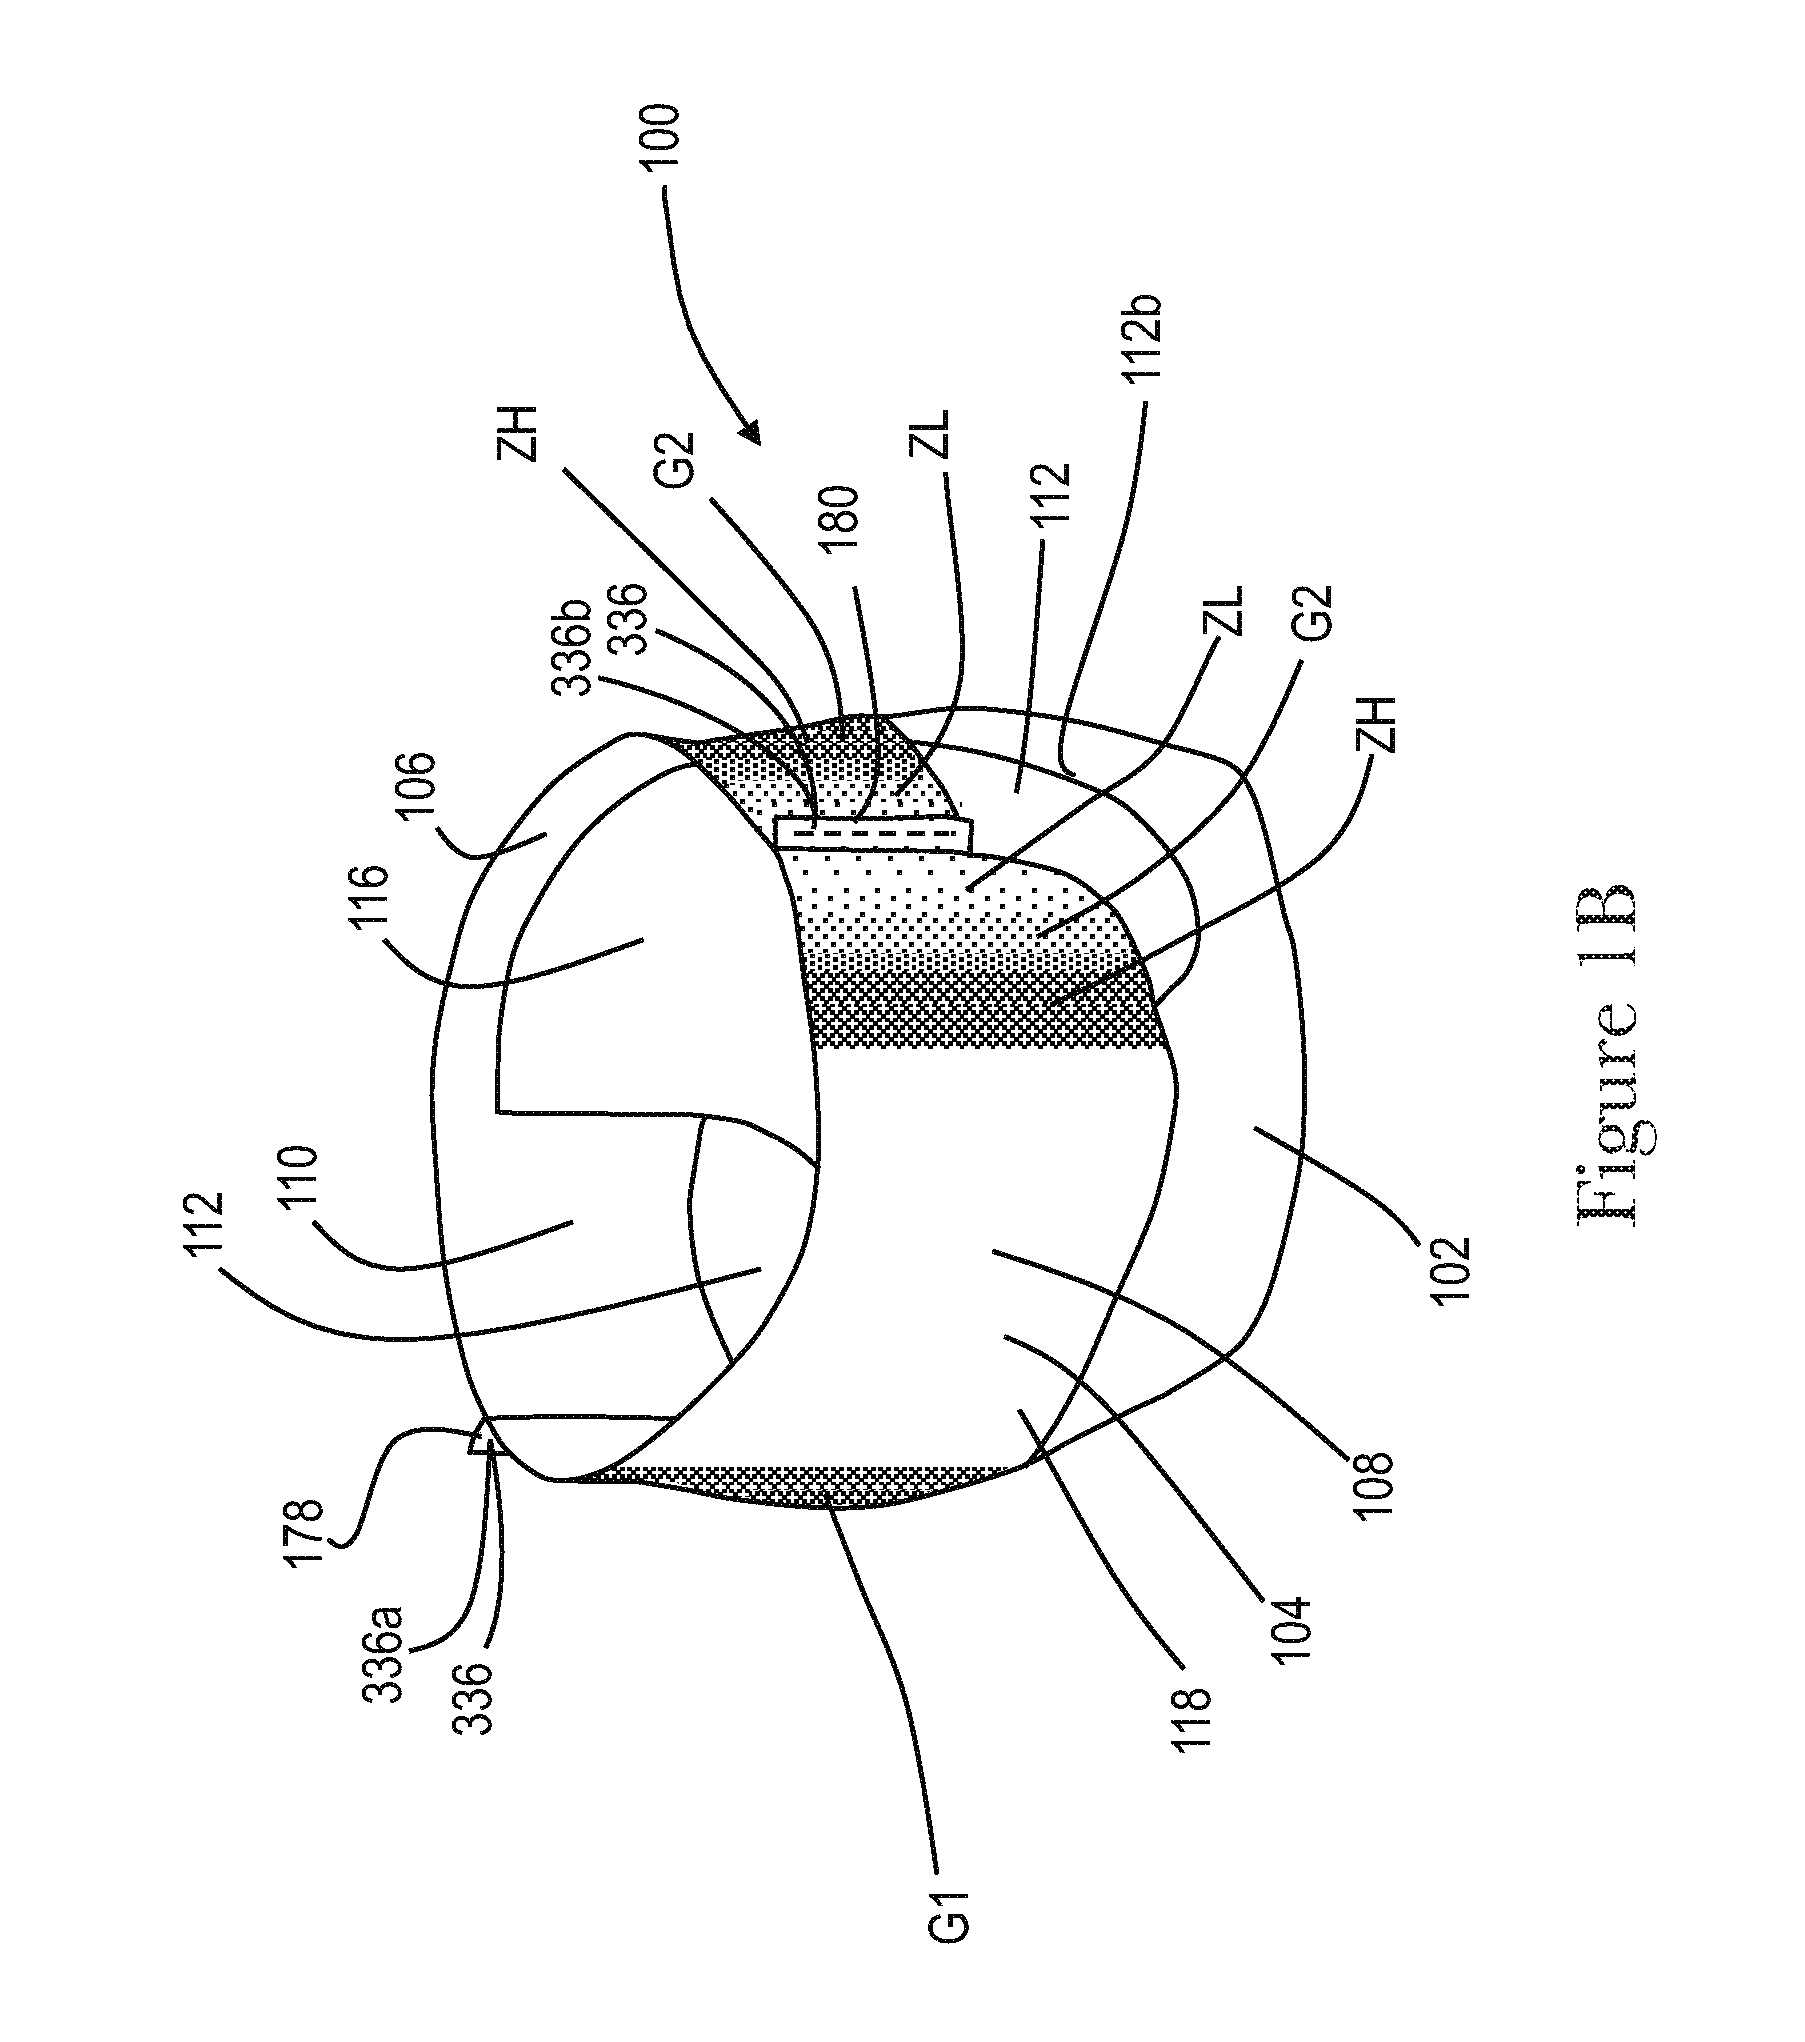 Apparatuses and Methods for Making Absorbent Articles with Low Intensity Side Seam Regions